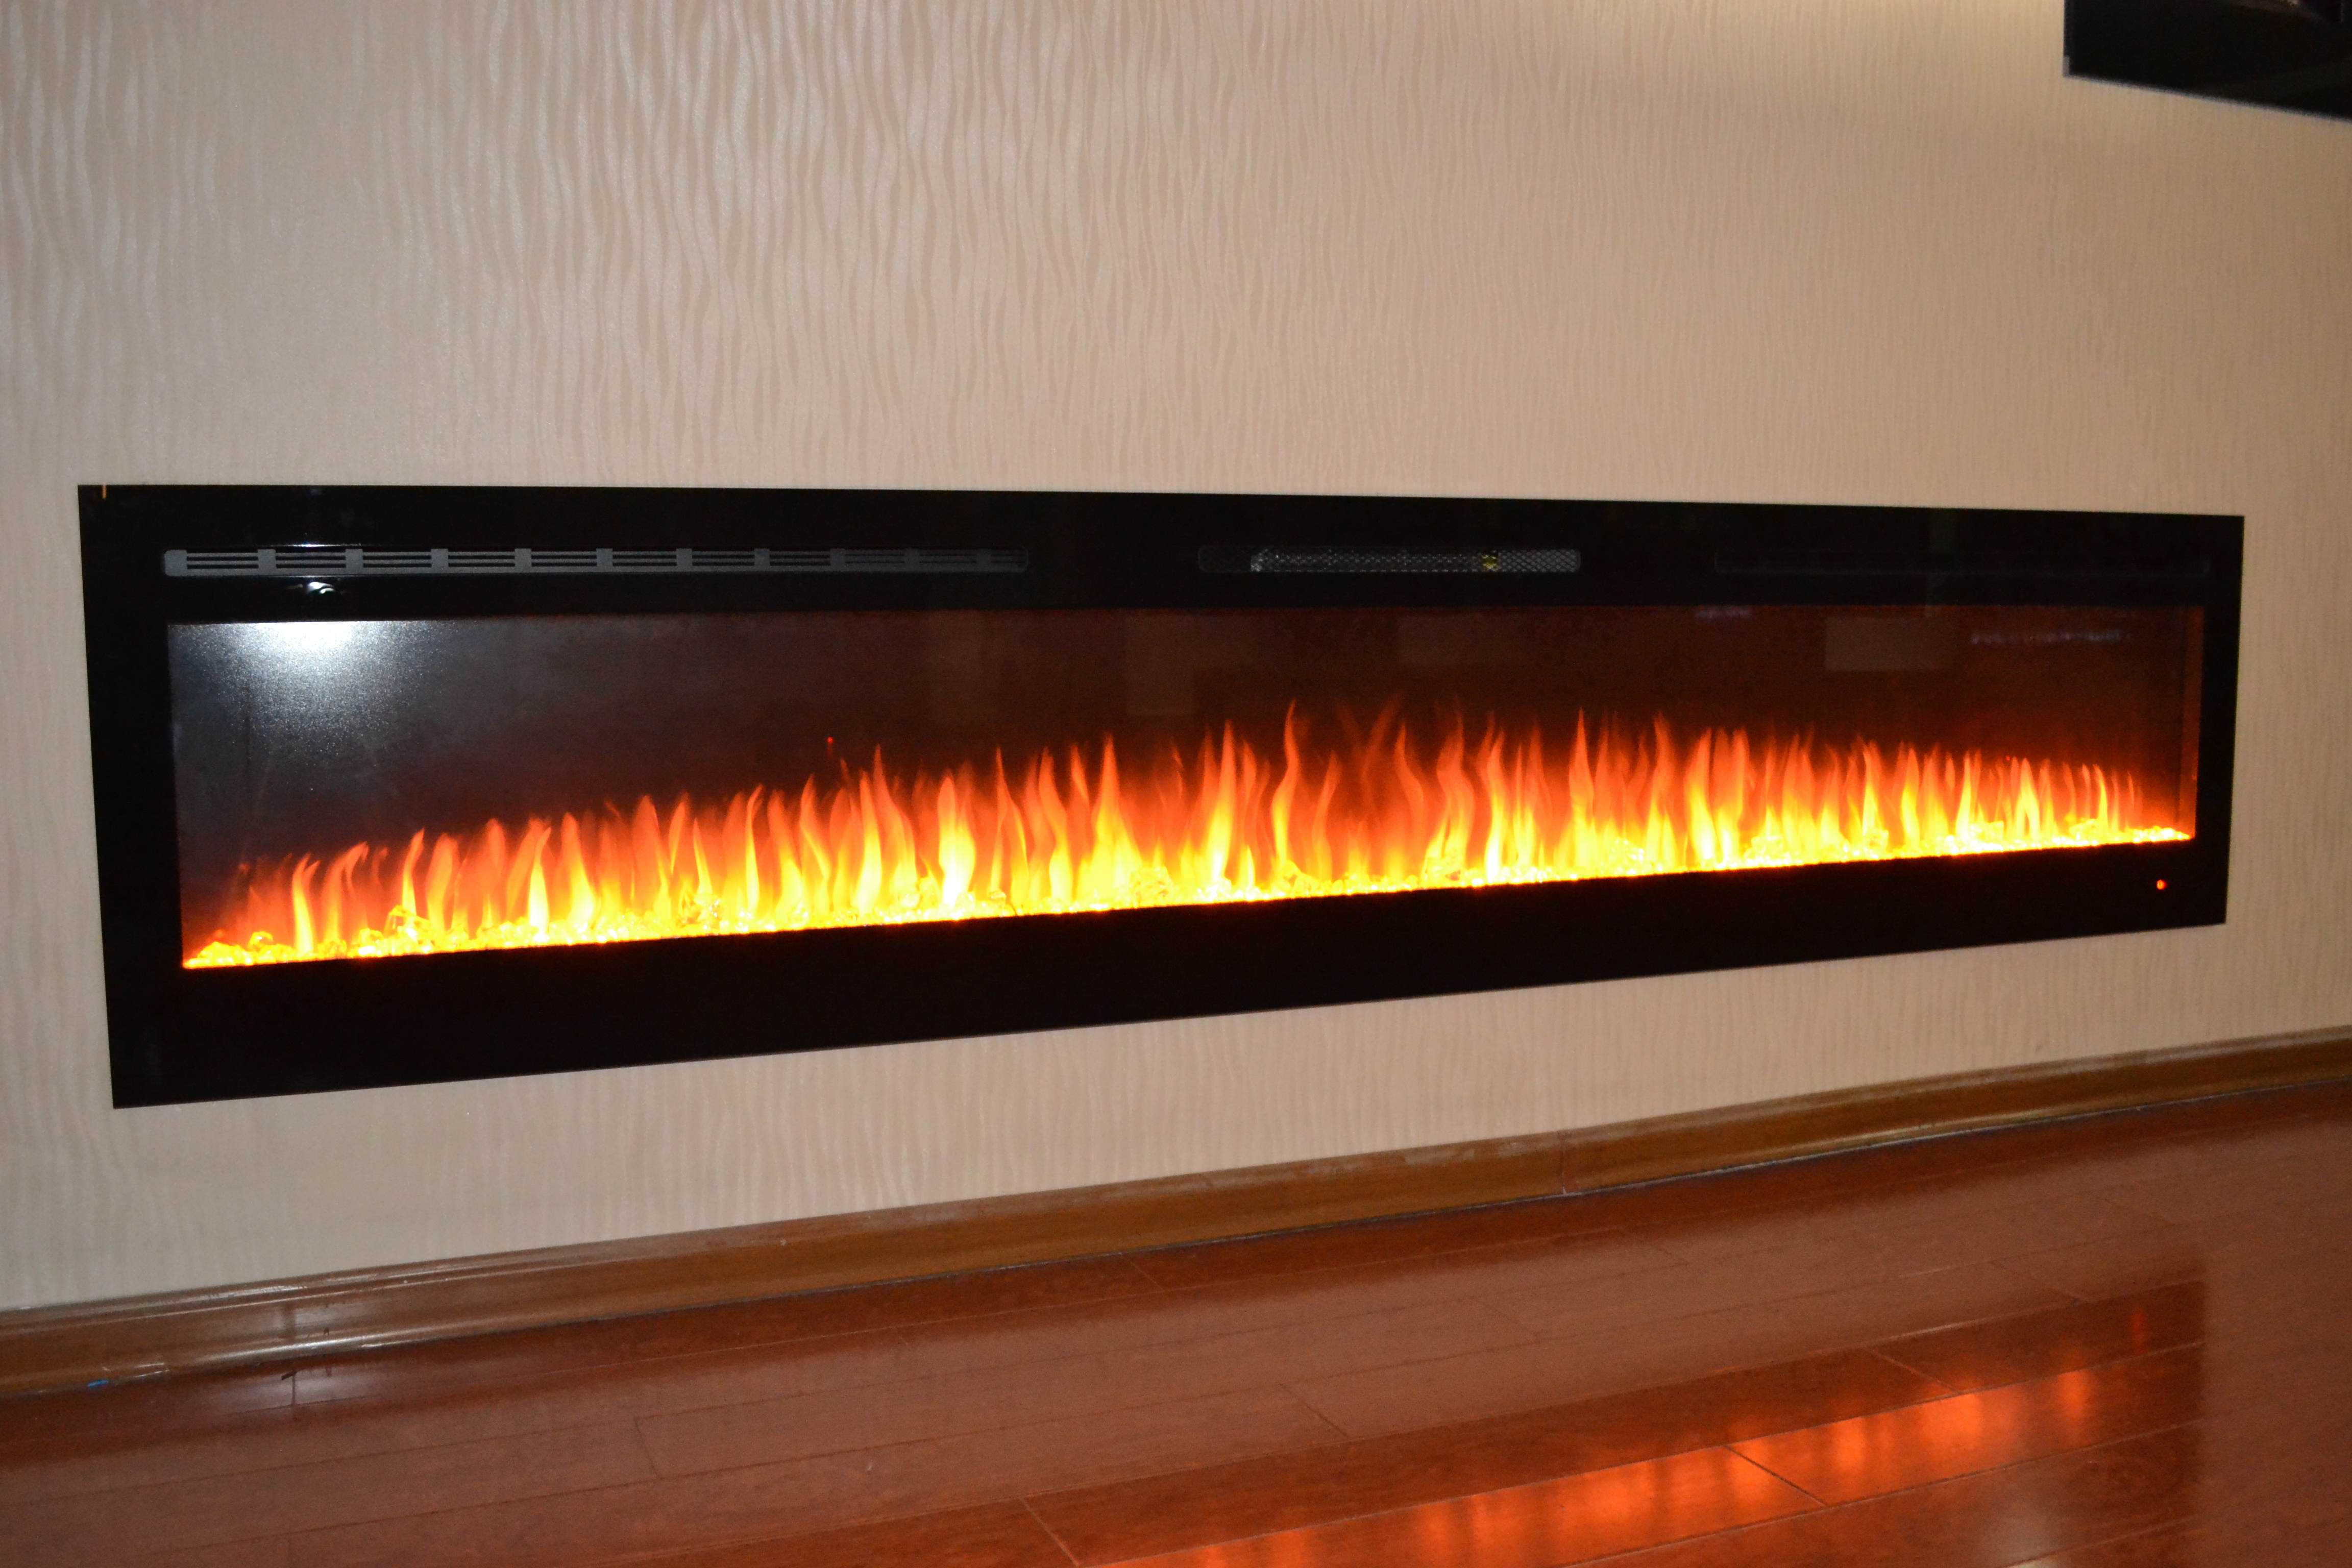 72inch large Black Wall Mounted Electric Fire with 3 colour Flames and can be inset orange flames